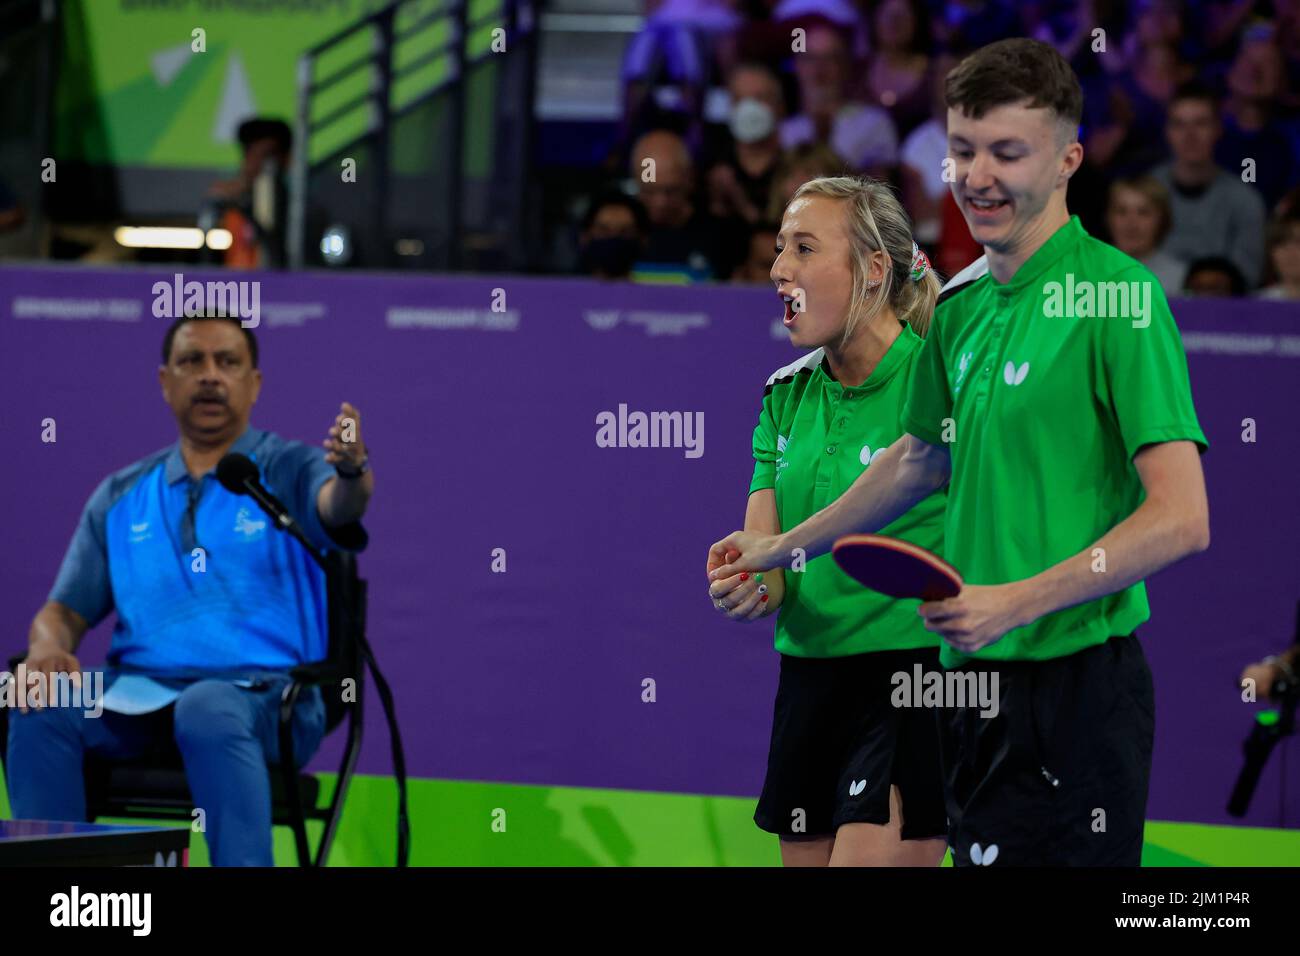 Birmingham, UK. 04th Aug, 2022. Charlotte Carey and Callum Evans of Wales celebrate winning a game against Sam Walker and Maria Tsaptsinos of England in Birmingham, United Kingdom on 8/4/2022. (Photo by Conor Molloy/News Images/Sipa USA) Credit: Sipa USA/Alamy Live News Stock Photo